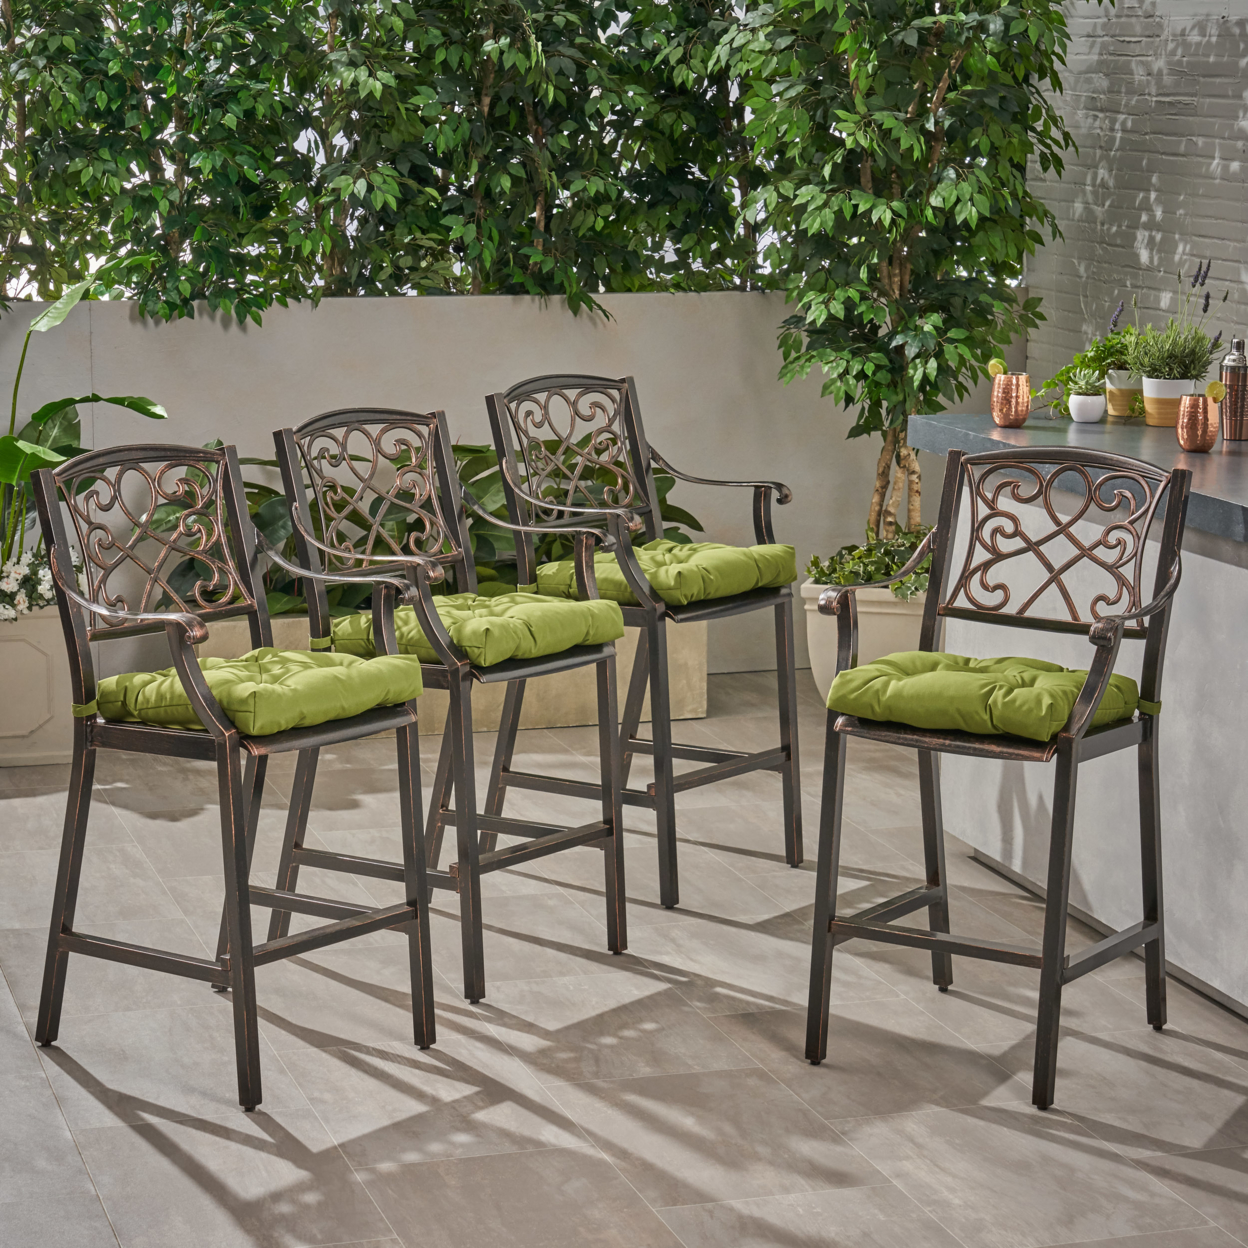 Deirdre Outdoor Barstool With Cushion (Set Of 4) - Shiny Copper + Charcoal